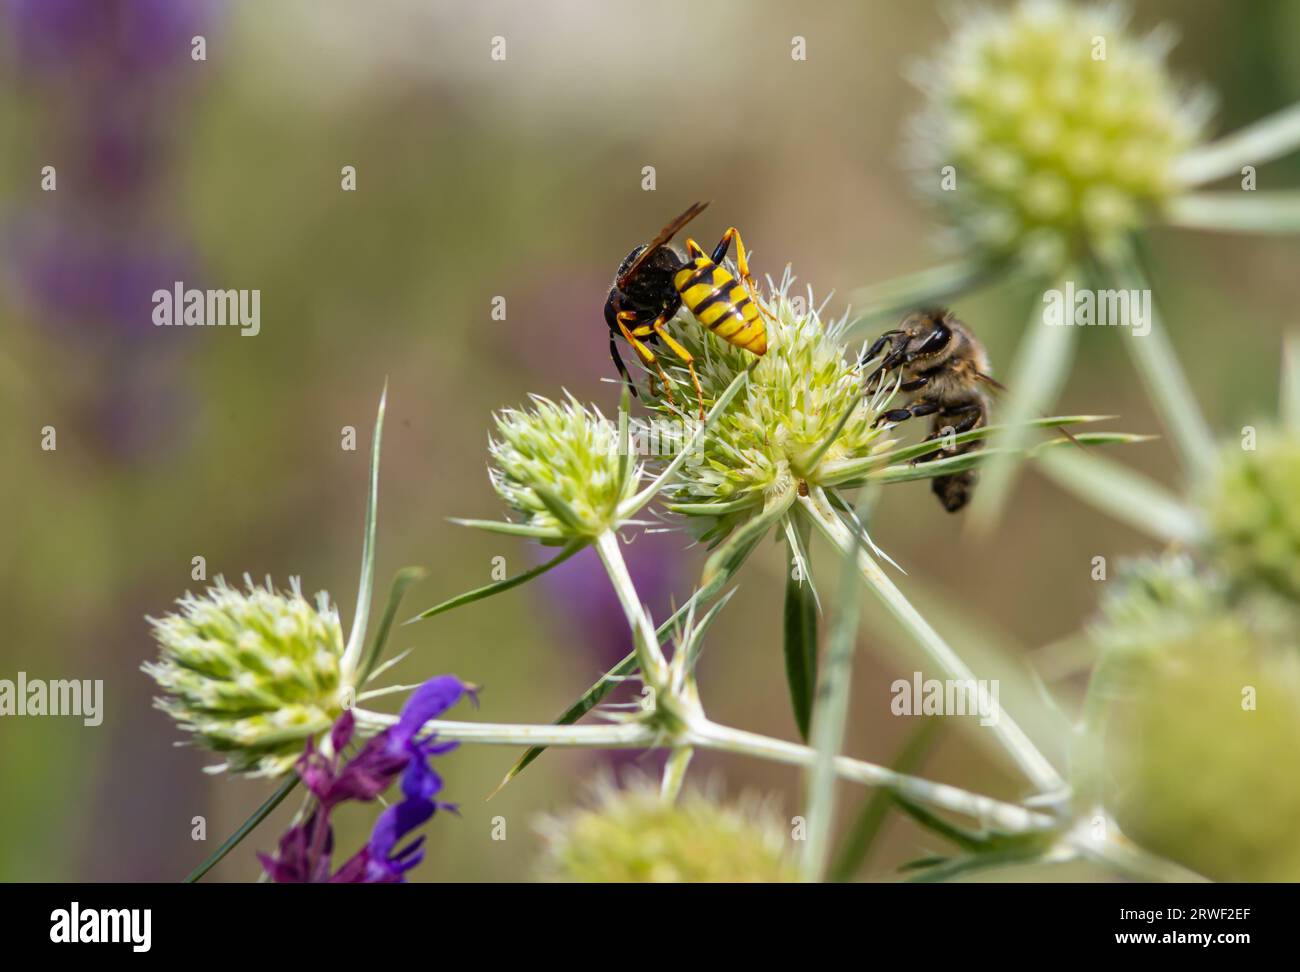 Bee on flowers of eryngium. Bee pollinates a flower in the garden. Stock Photo